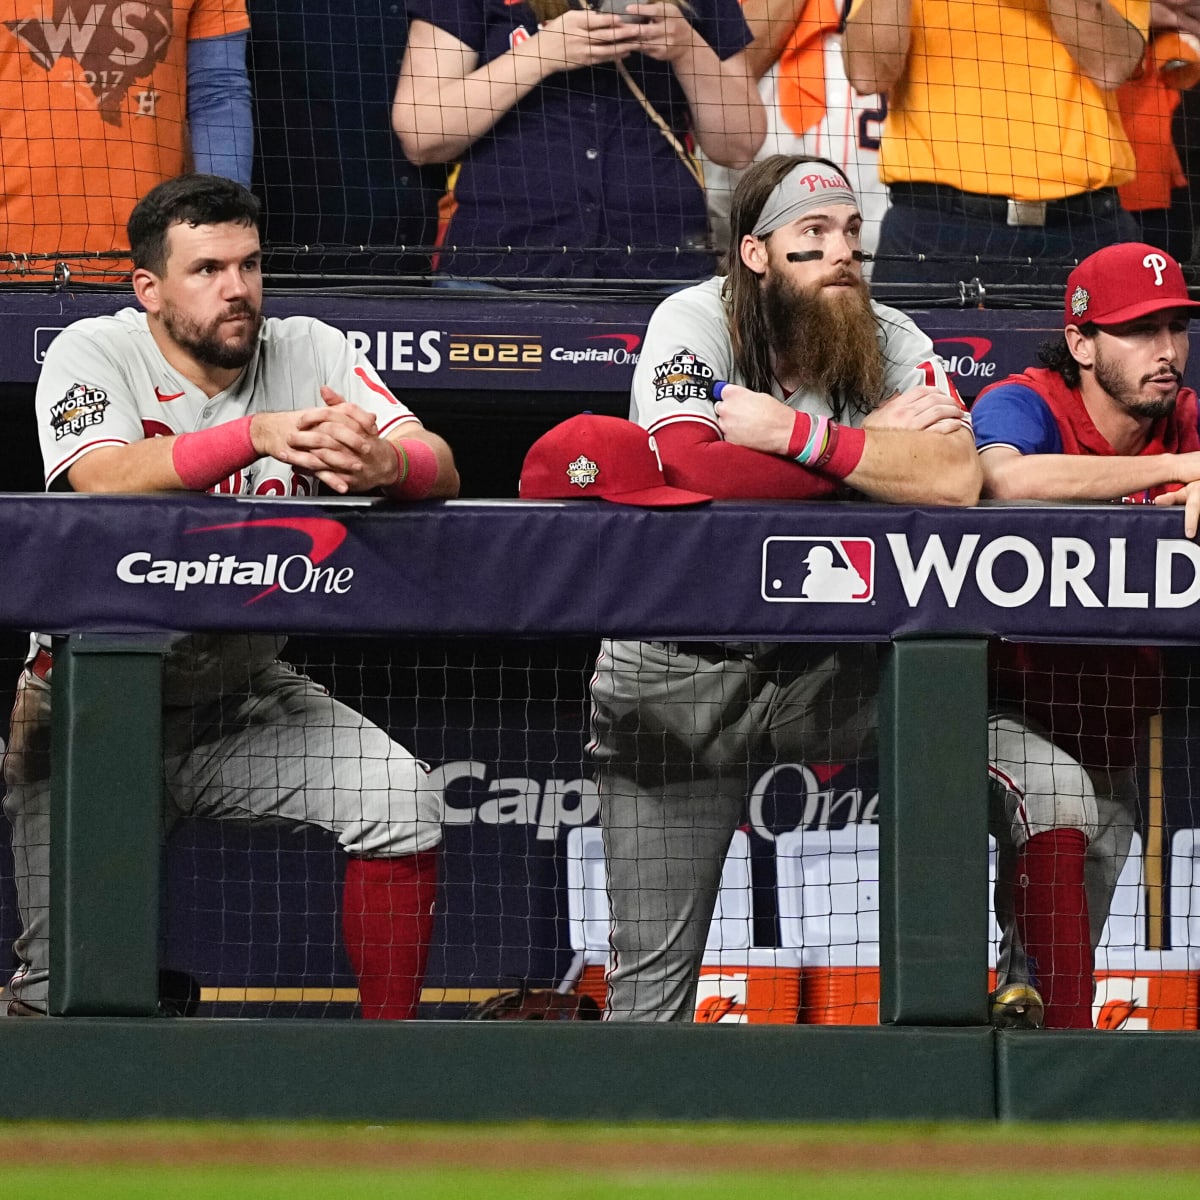 Phillies to face Astros in first World Series in over a decade